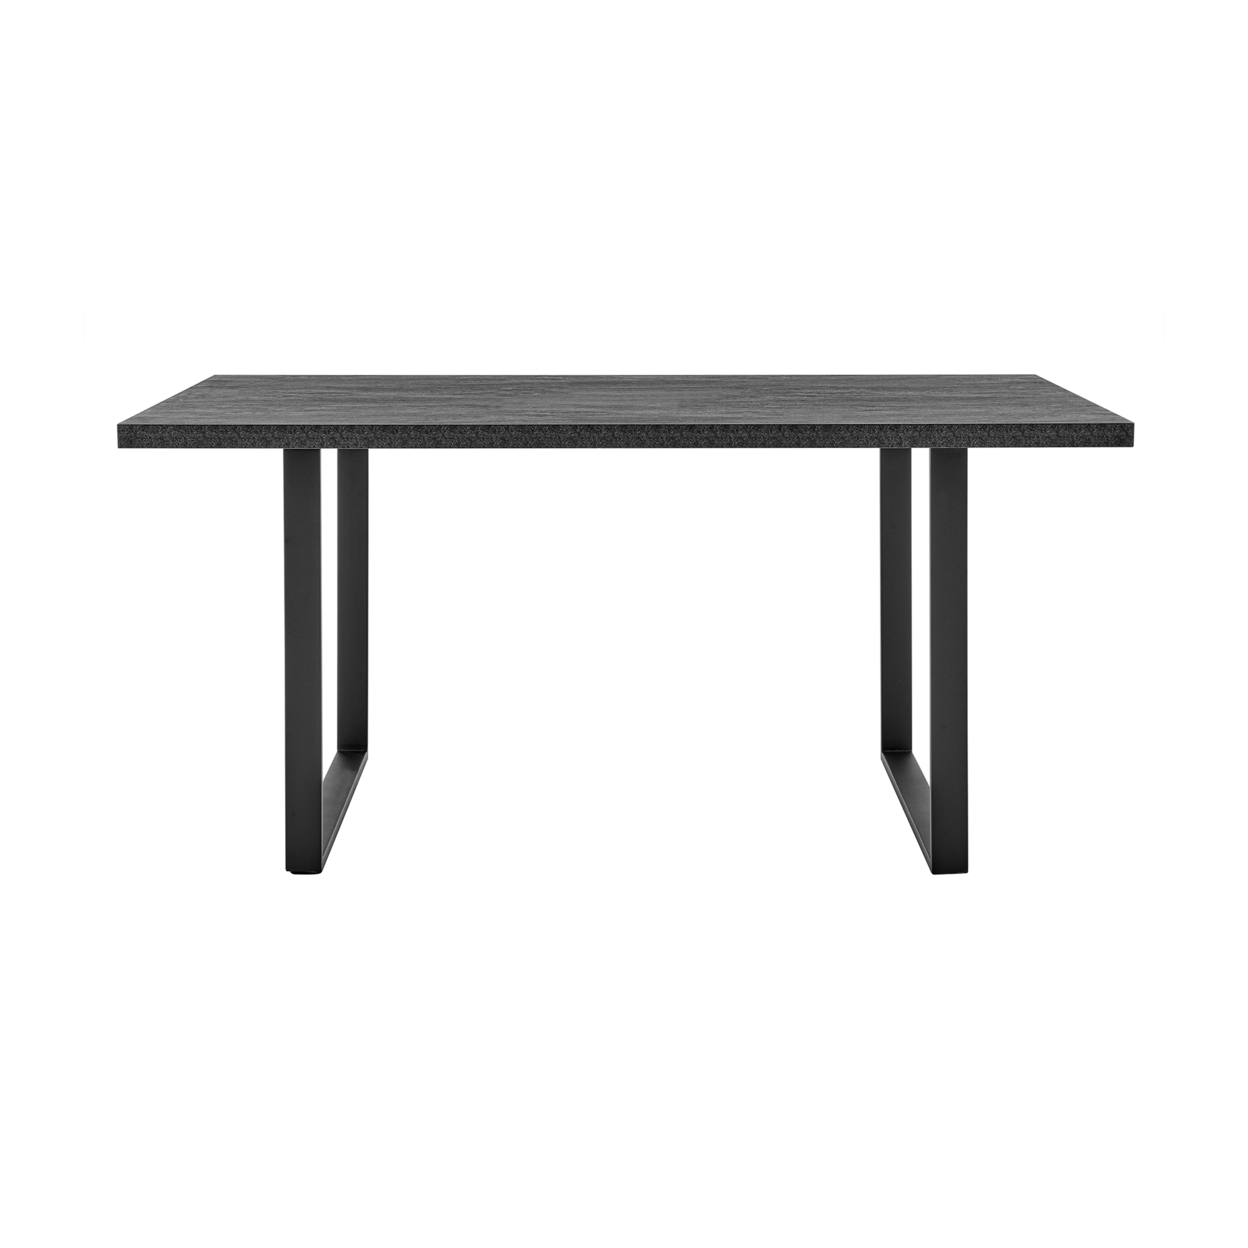 Dining Table With Wooden Top And Metal Sled Base, Gray And Black- Saltoro Sherpi